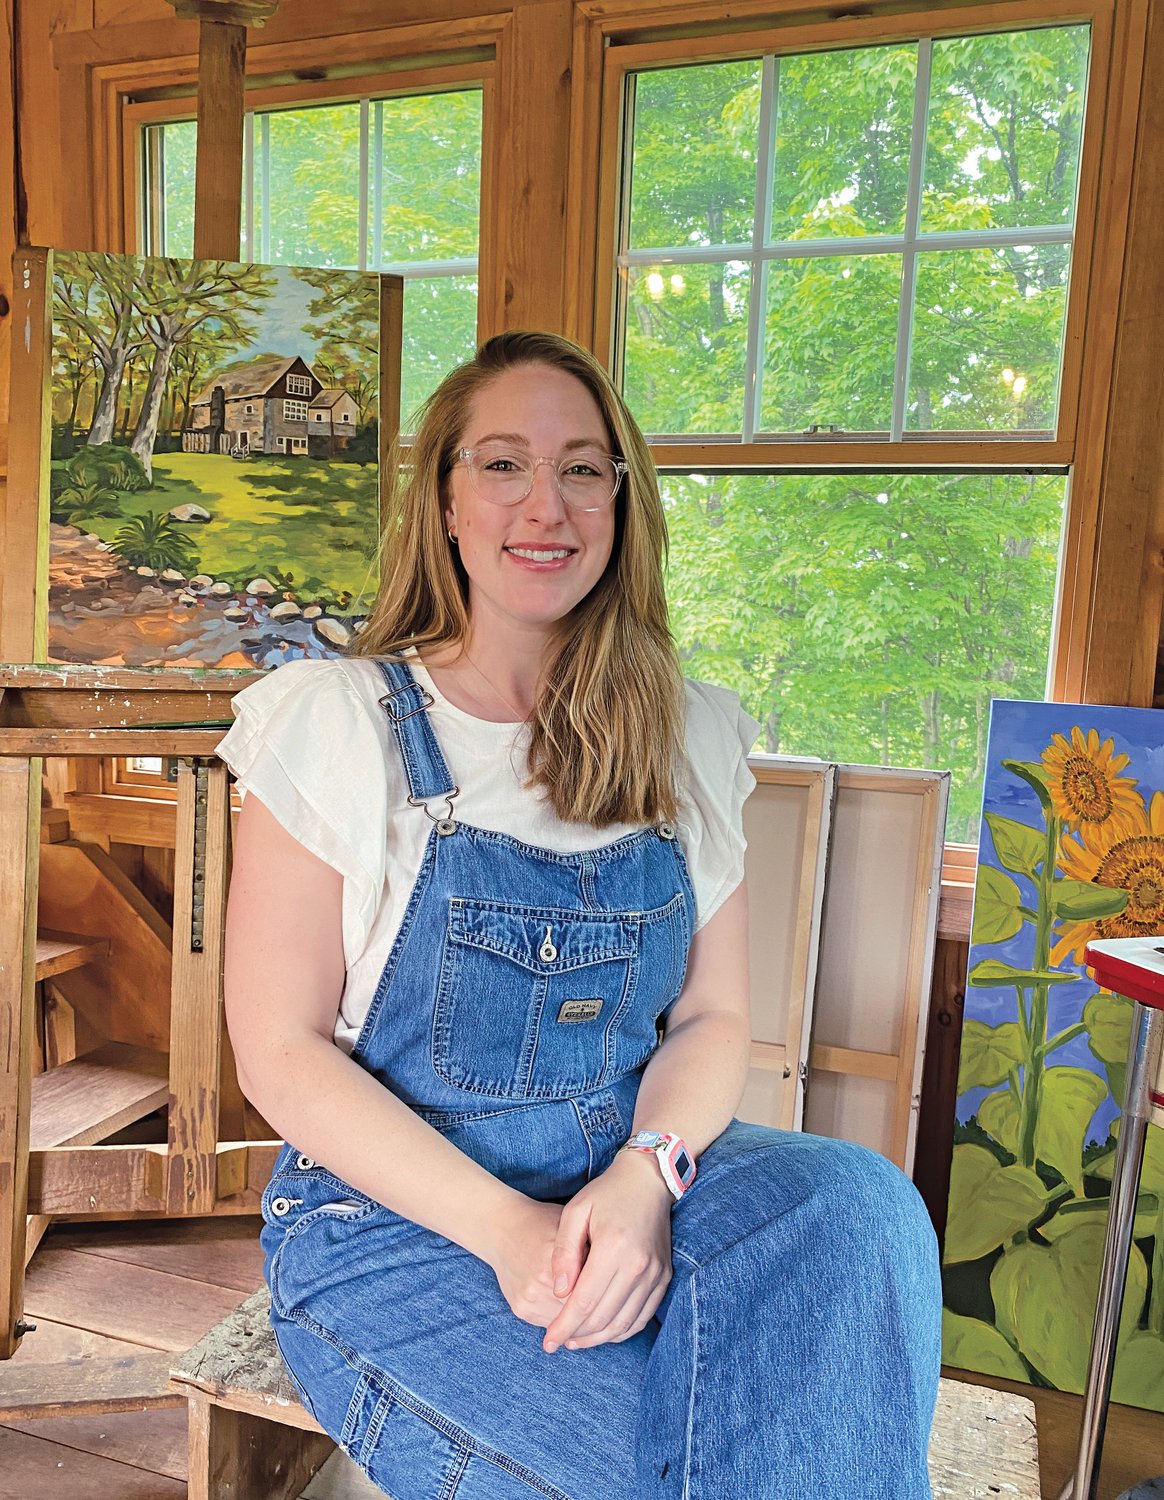 Amanda Penecale, with some of her artwork. She will lead “Painting in Nature at Phillips’ Mill,” a workshop series for teens.